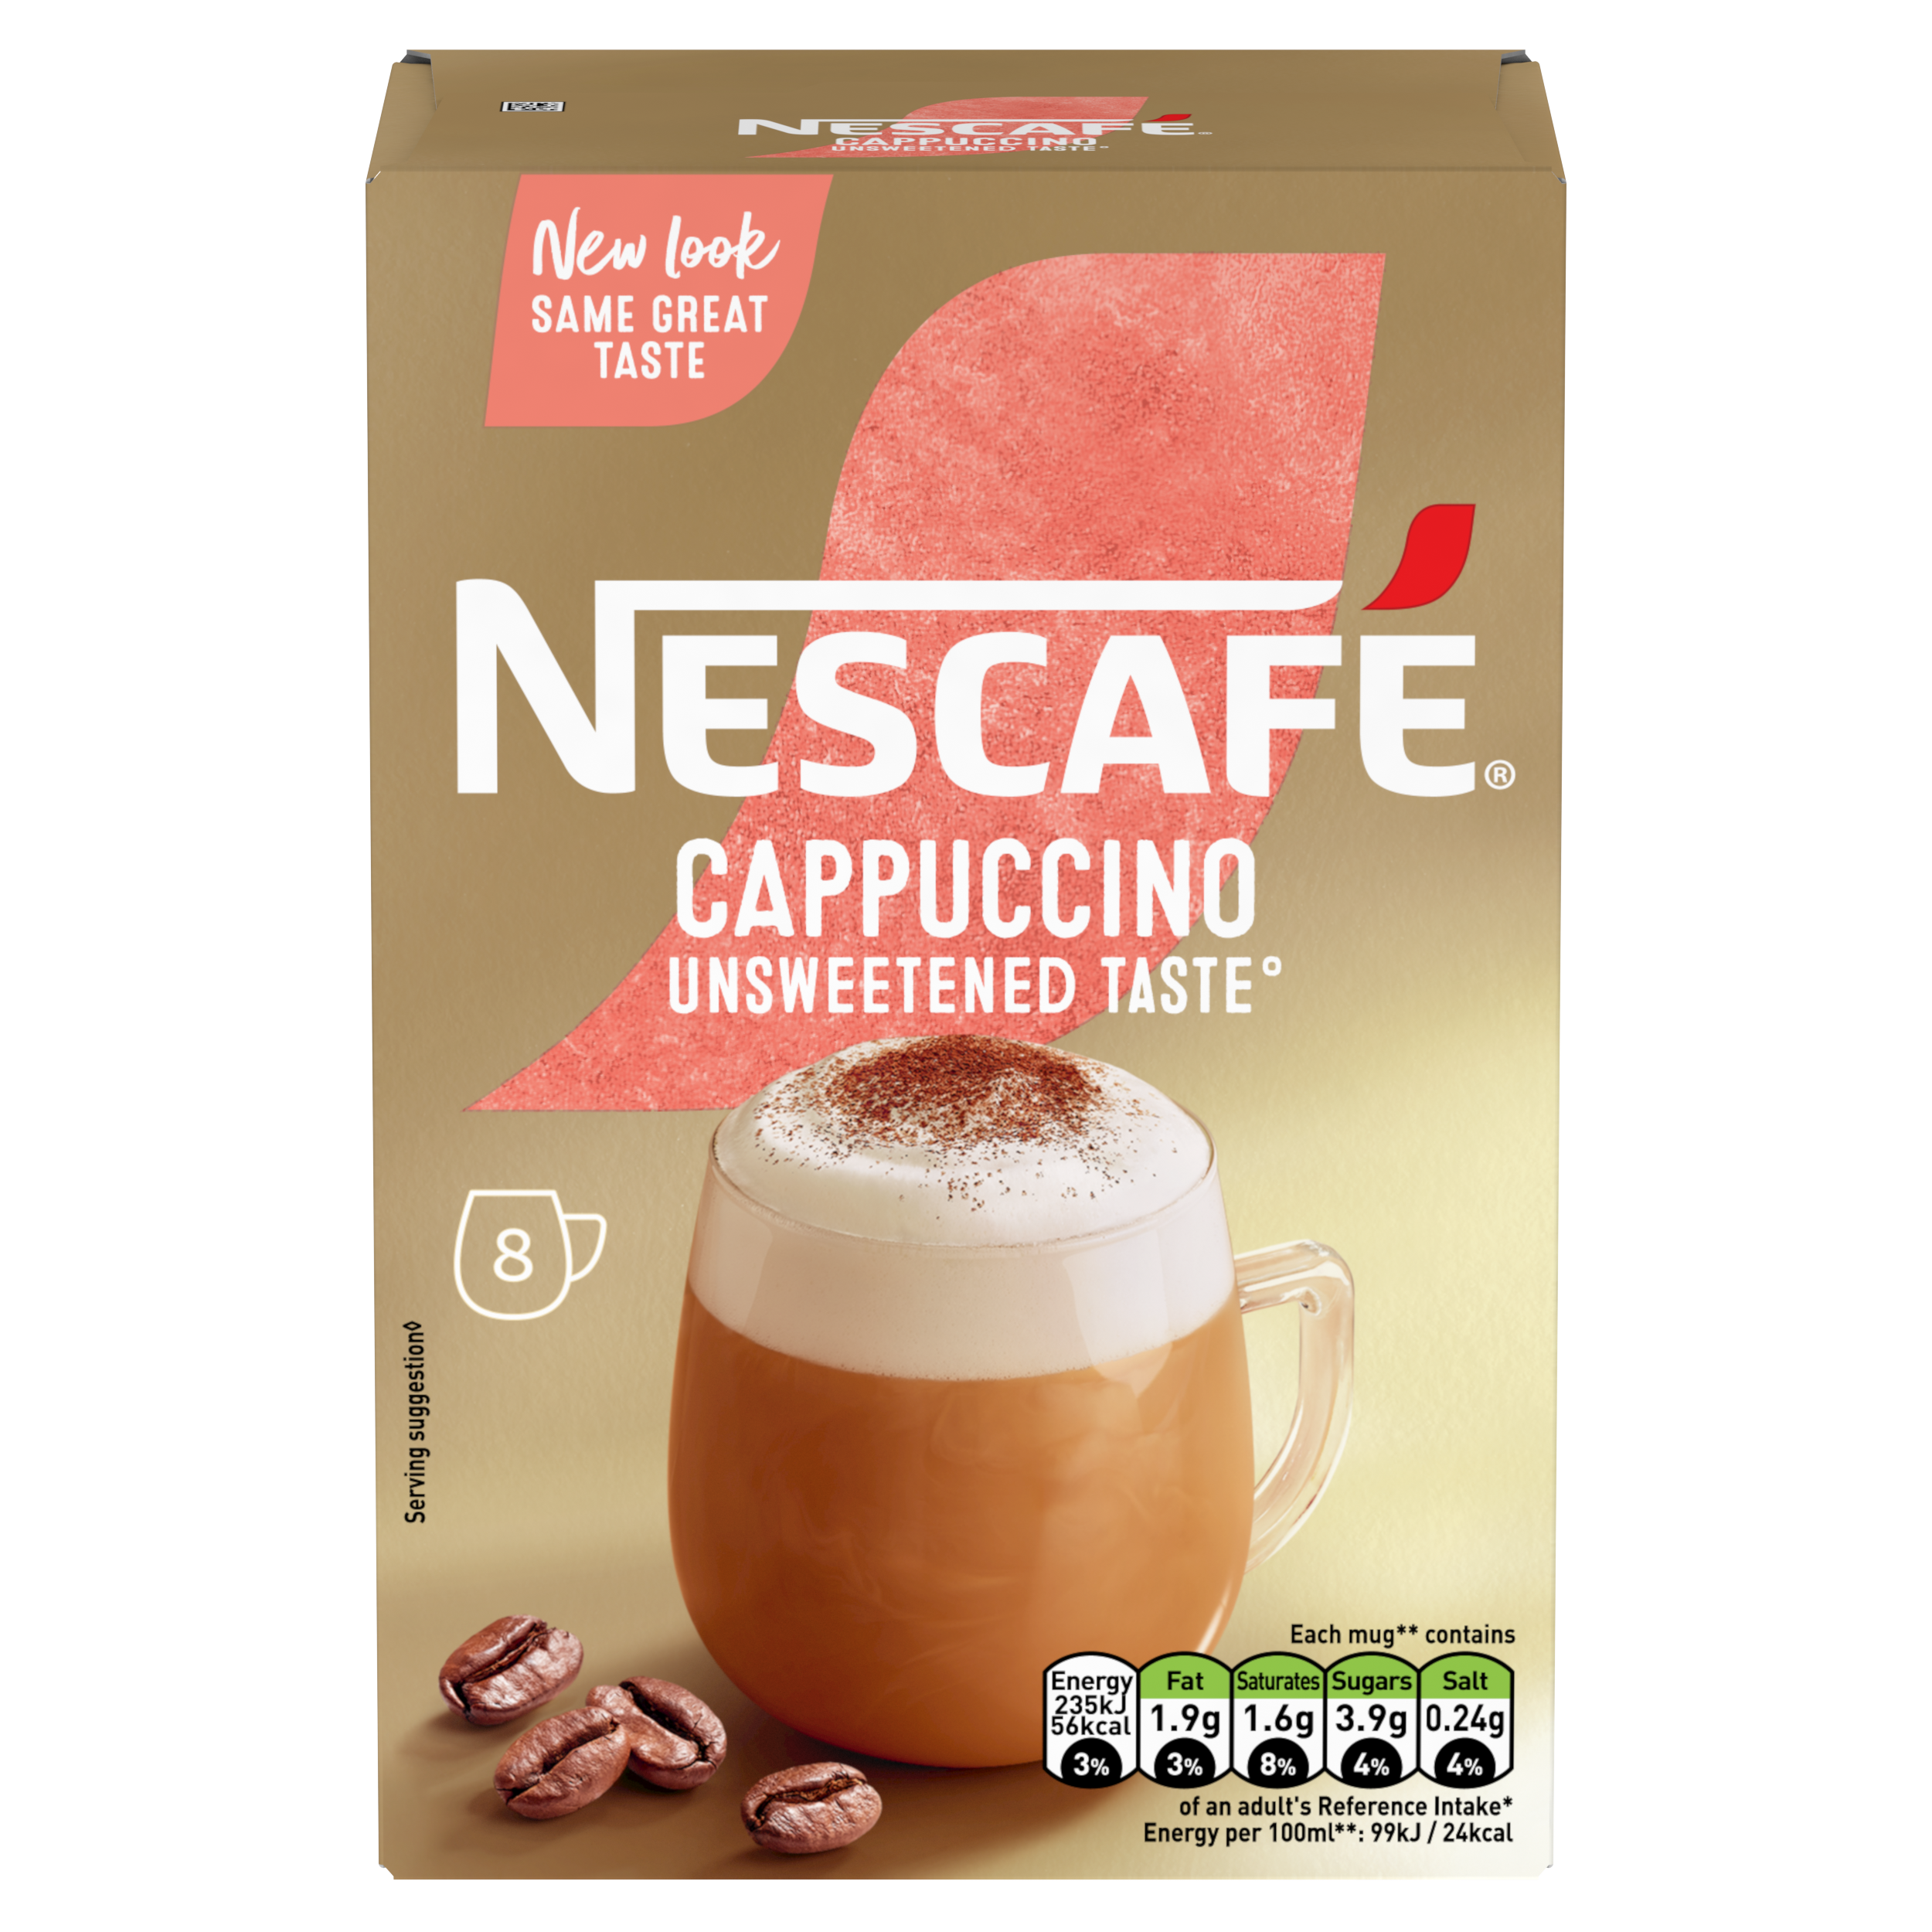 Cappuccino Unsweetened